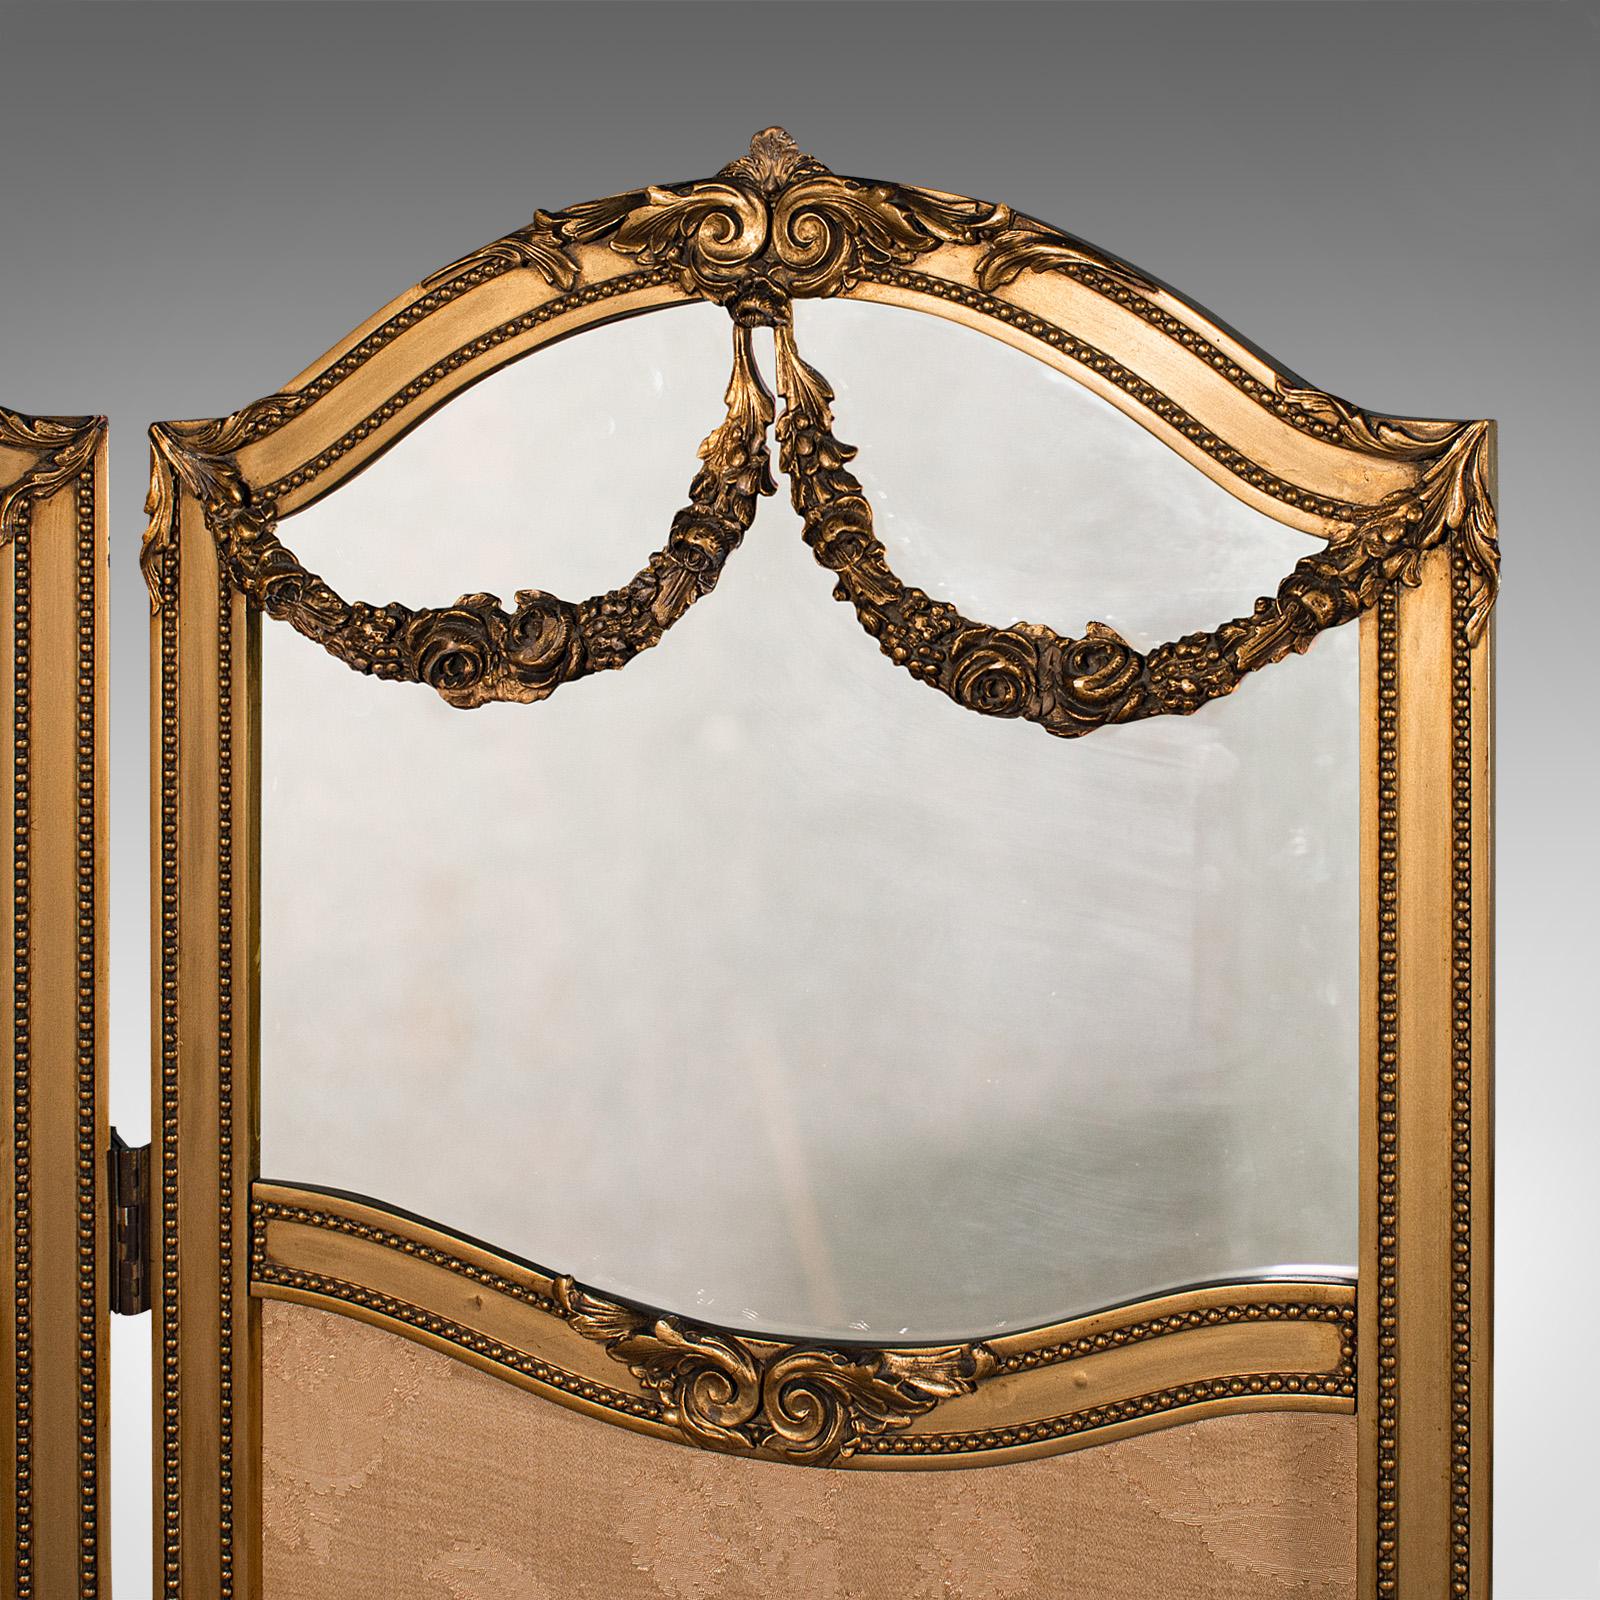 19th Century Antique 3 Panel Dressing Screen, French, Giltwood, Room Divider, Victorian, 1900 For Sale